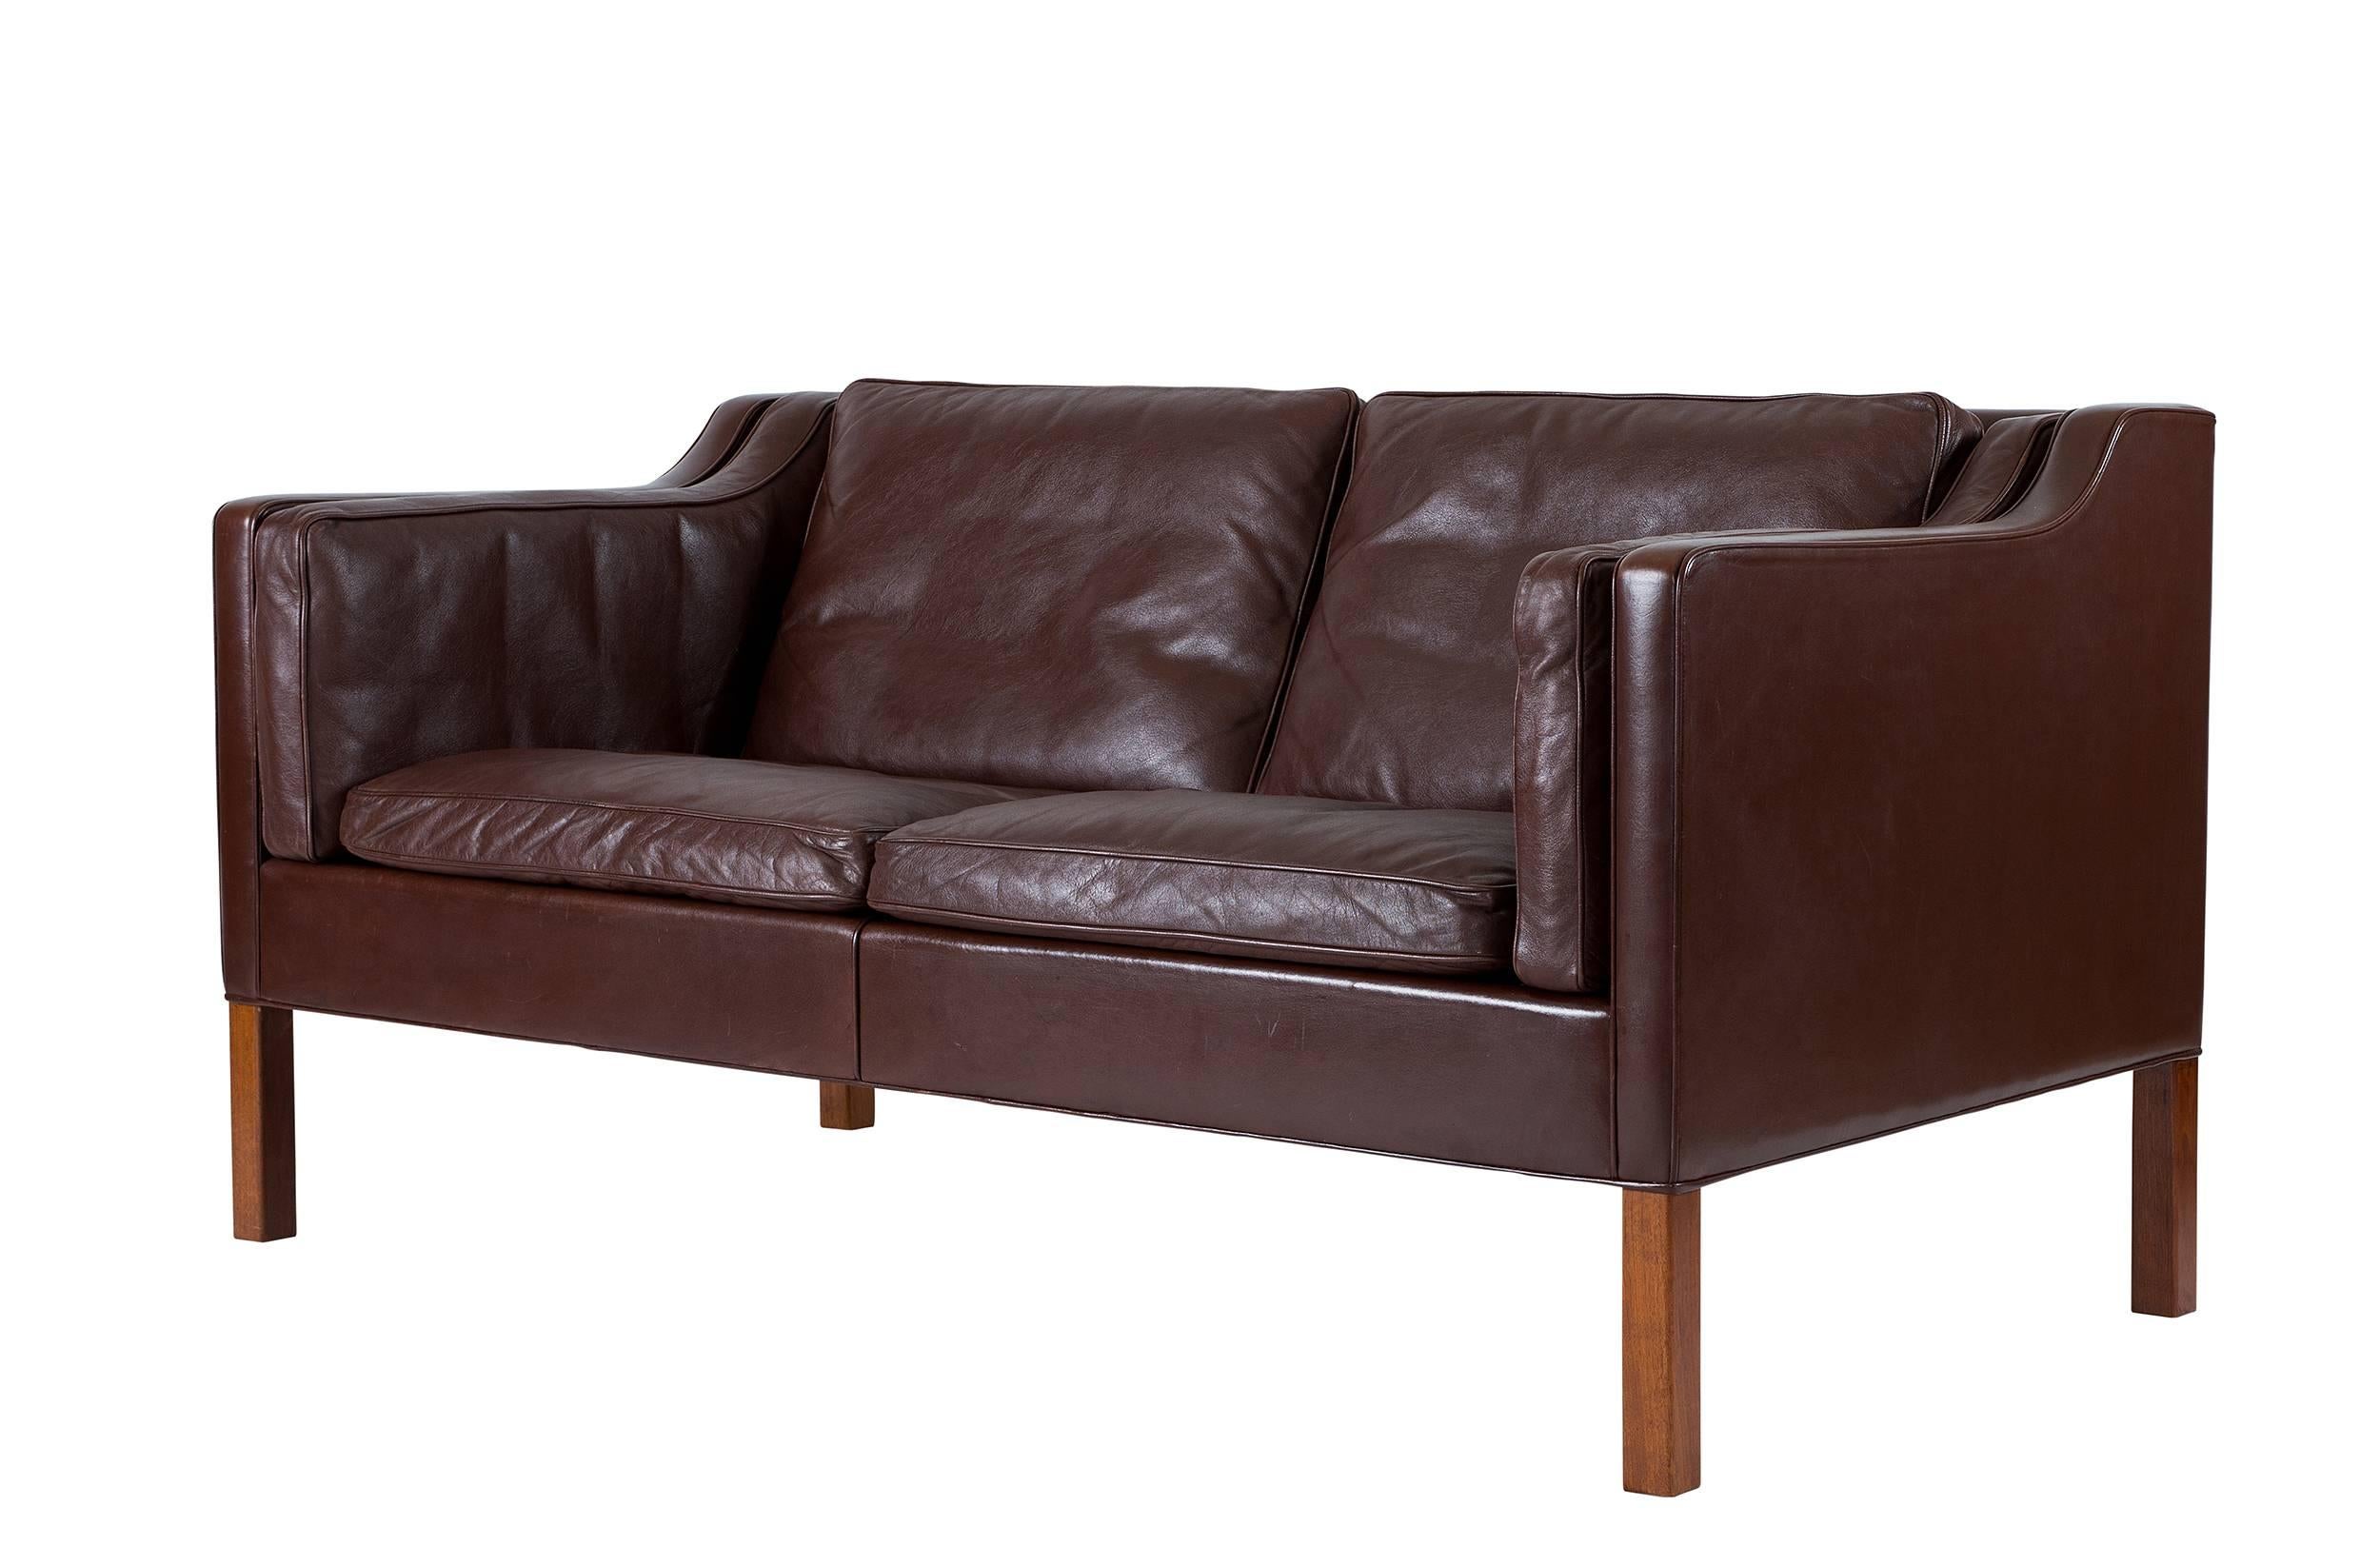 Børge Mogensen model #2212 dark brown leather two-seat sofa designed in 1960 and produced by Fredericia.